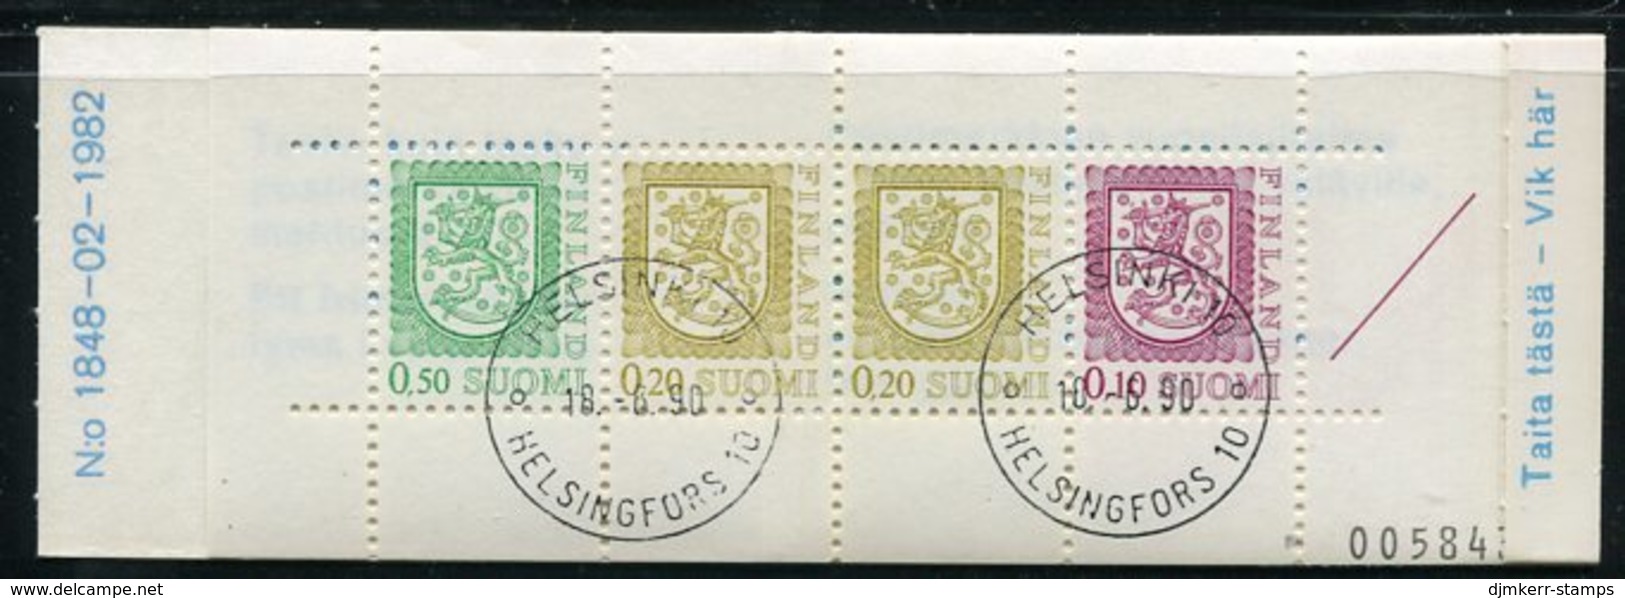 FINLAND 1983 Lion Definitive 1 Mk. Complete Booklet, Cancelled.  Michel MH 14 - Carnets